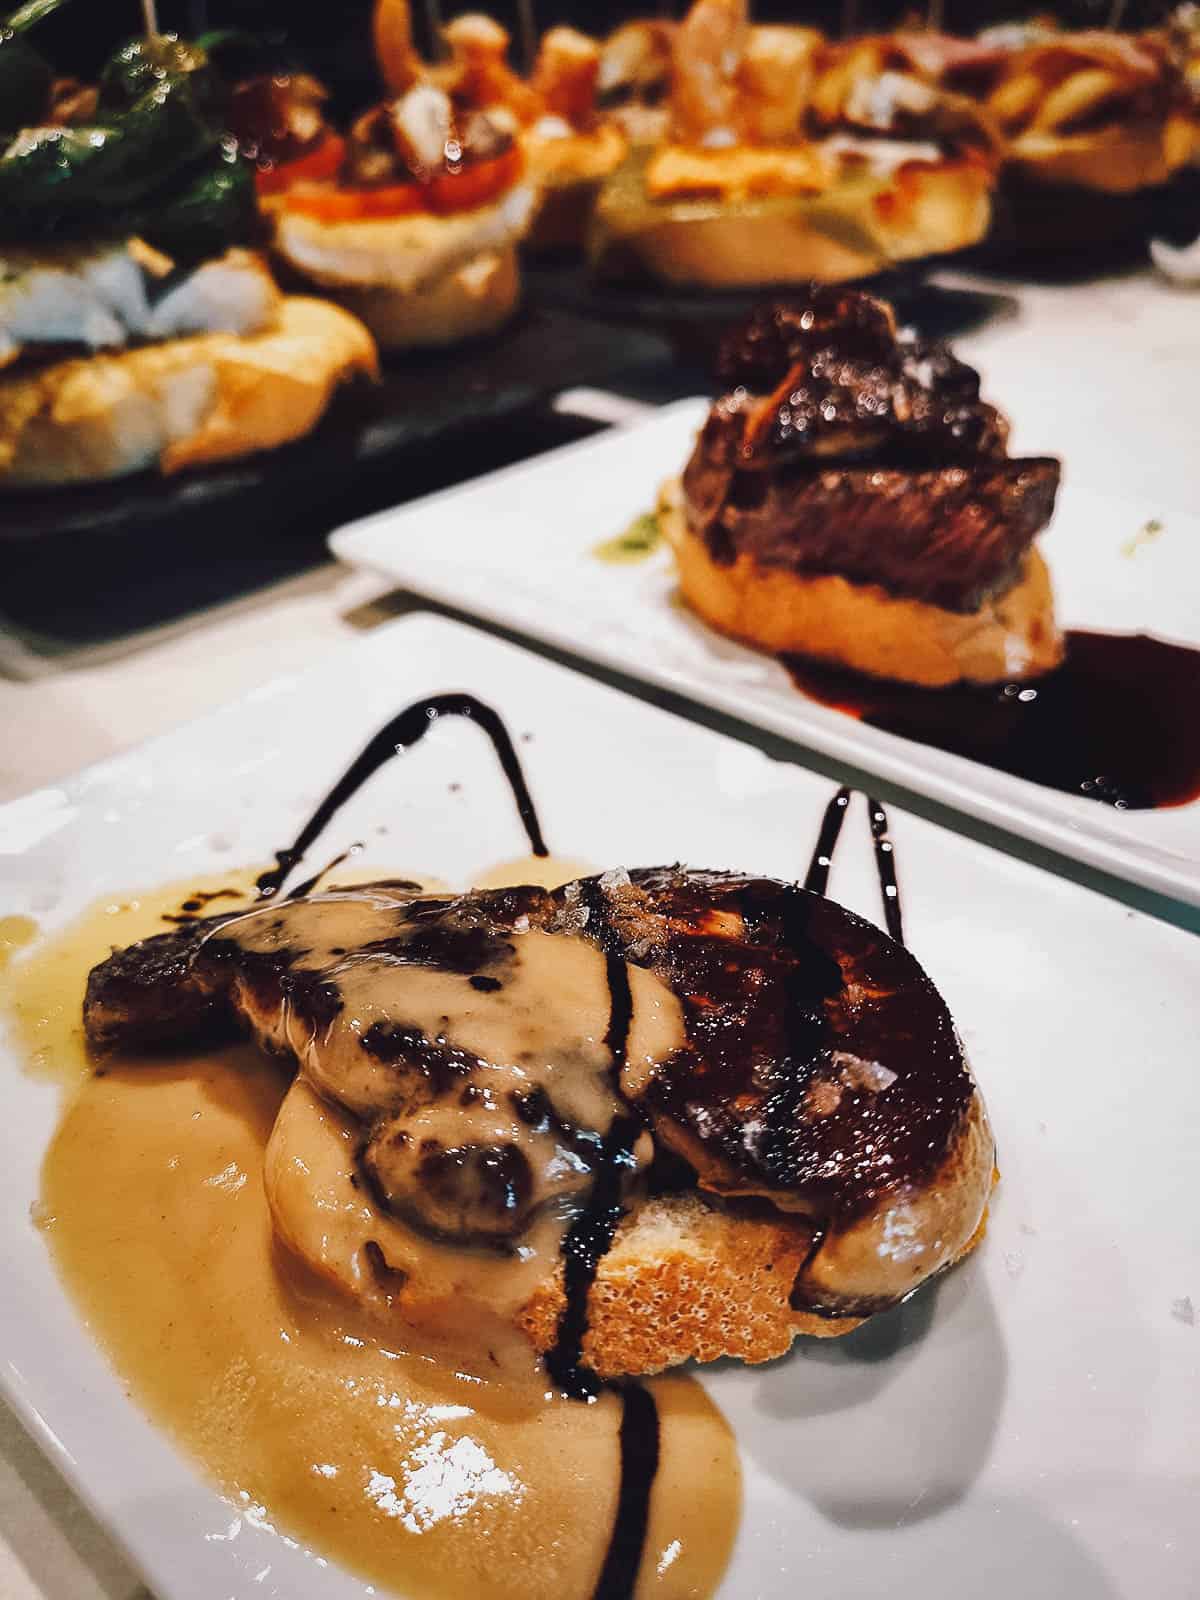 Pintxos with foie gras, one of the most delicious Spanish dishes from the Basque Country